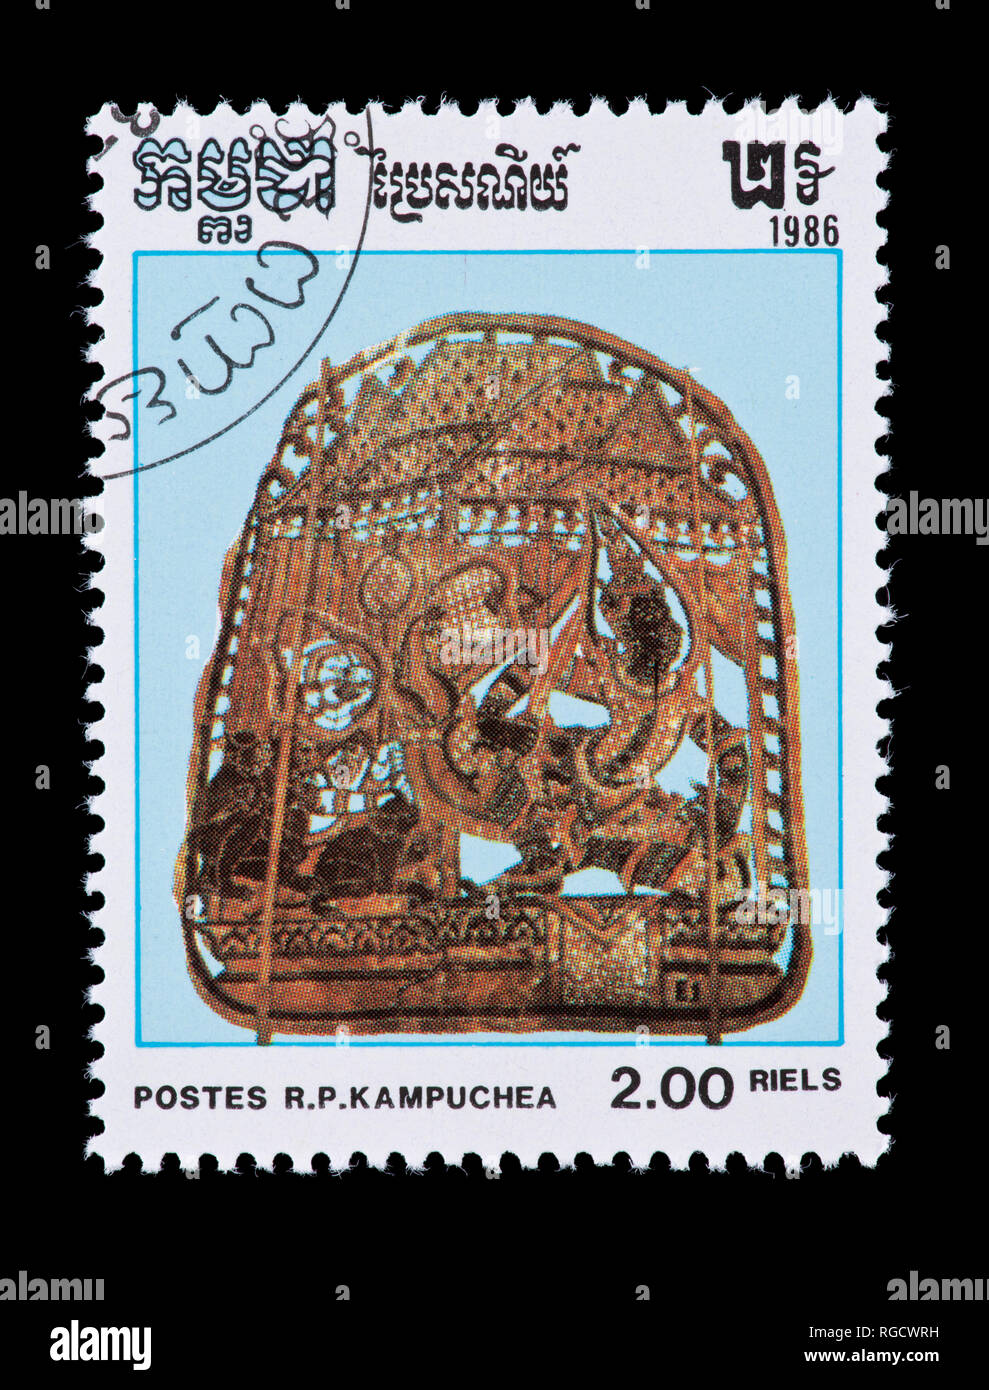 Postage stamp from Cambodia (Kampuchea) depicting a fan, issued for Khmer culture. Stock Photo